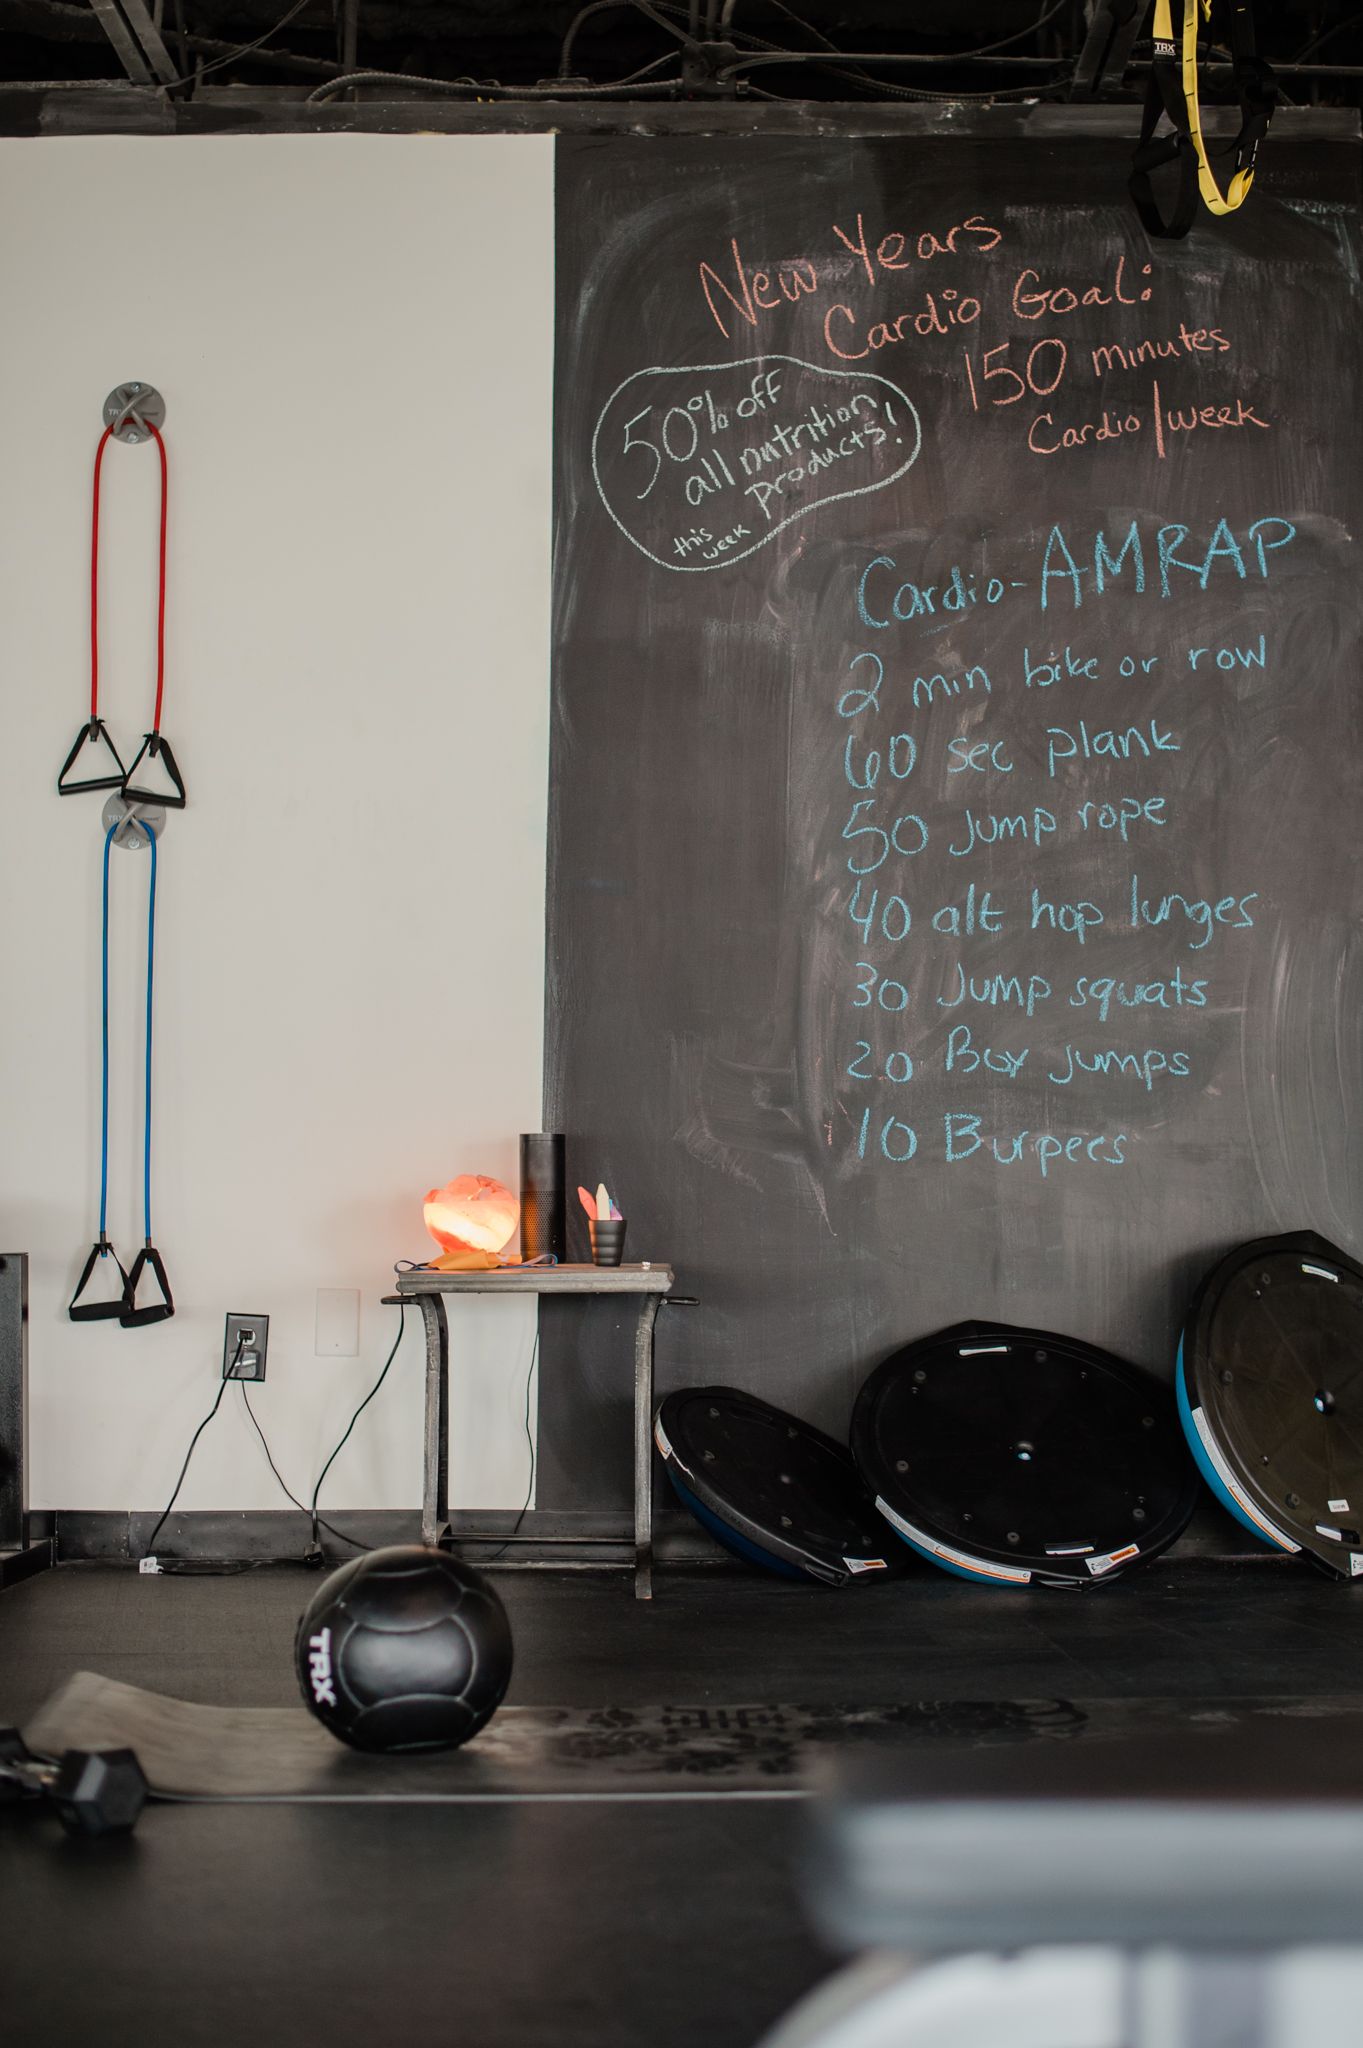 A gym with a chalkboard with exercise rep instructions written on it. Around the chalkboard are several barbell weights, a medicine ball, and other exercise equipment.